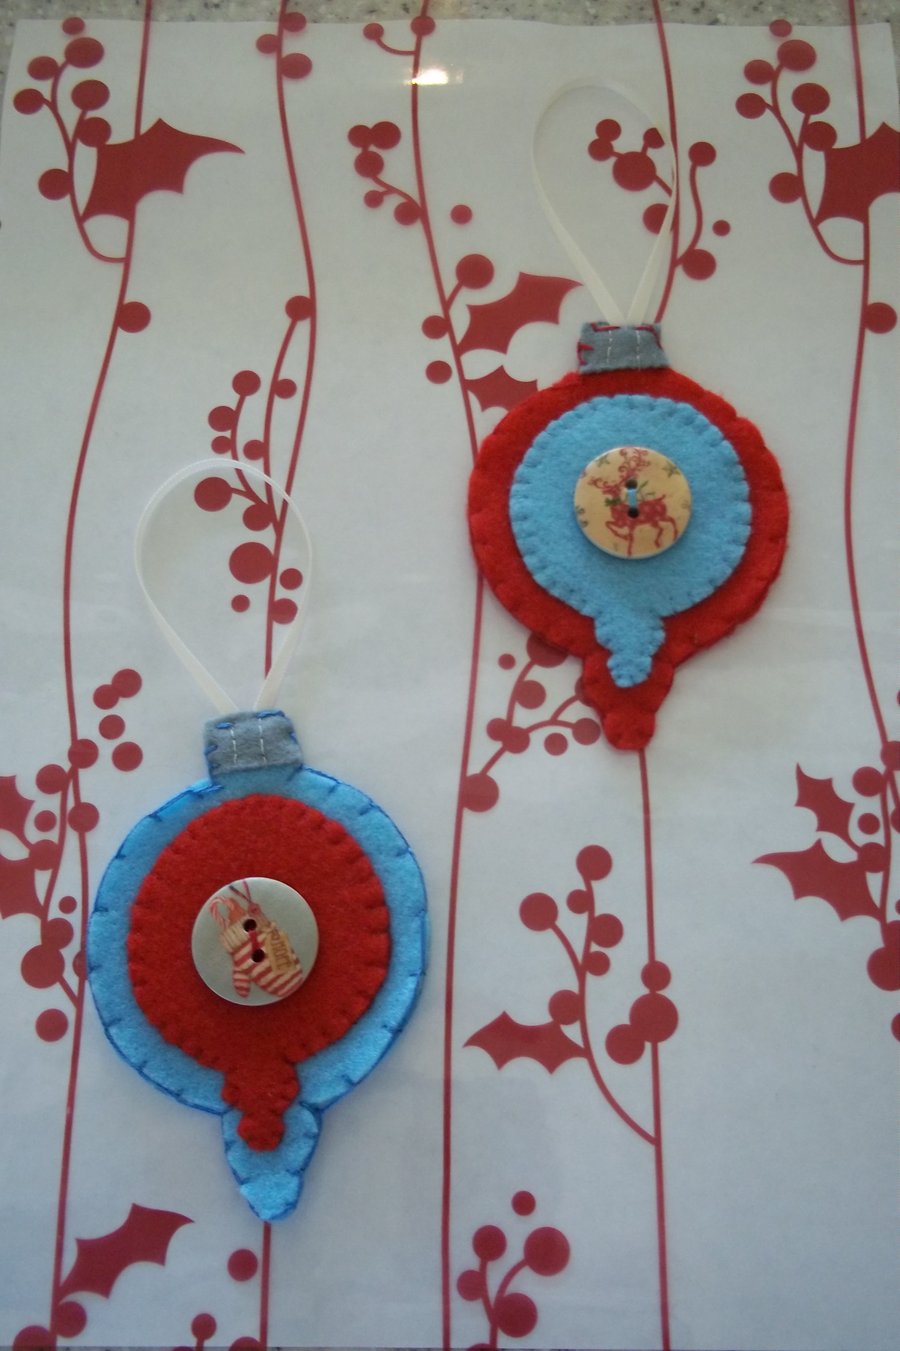 Pair of bauble shaped felt handstitched red and blue Christmas decorations